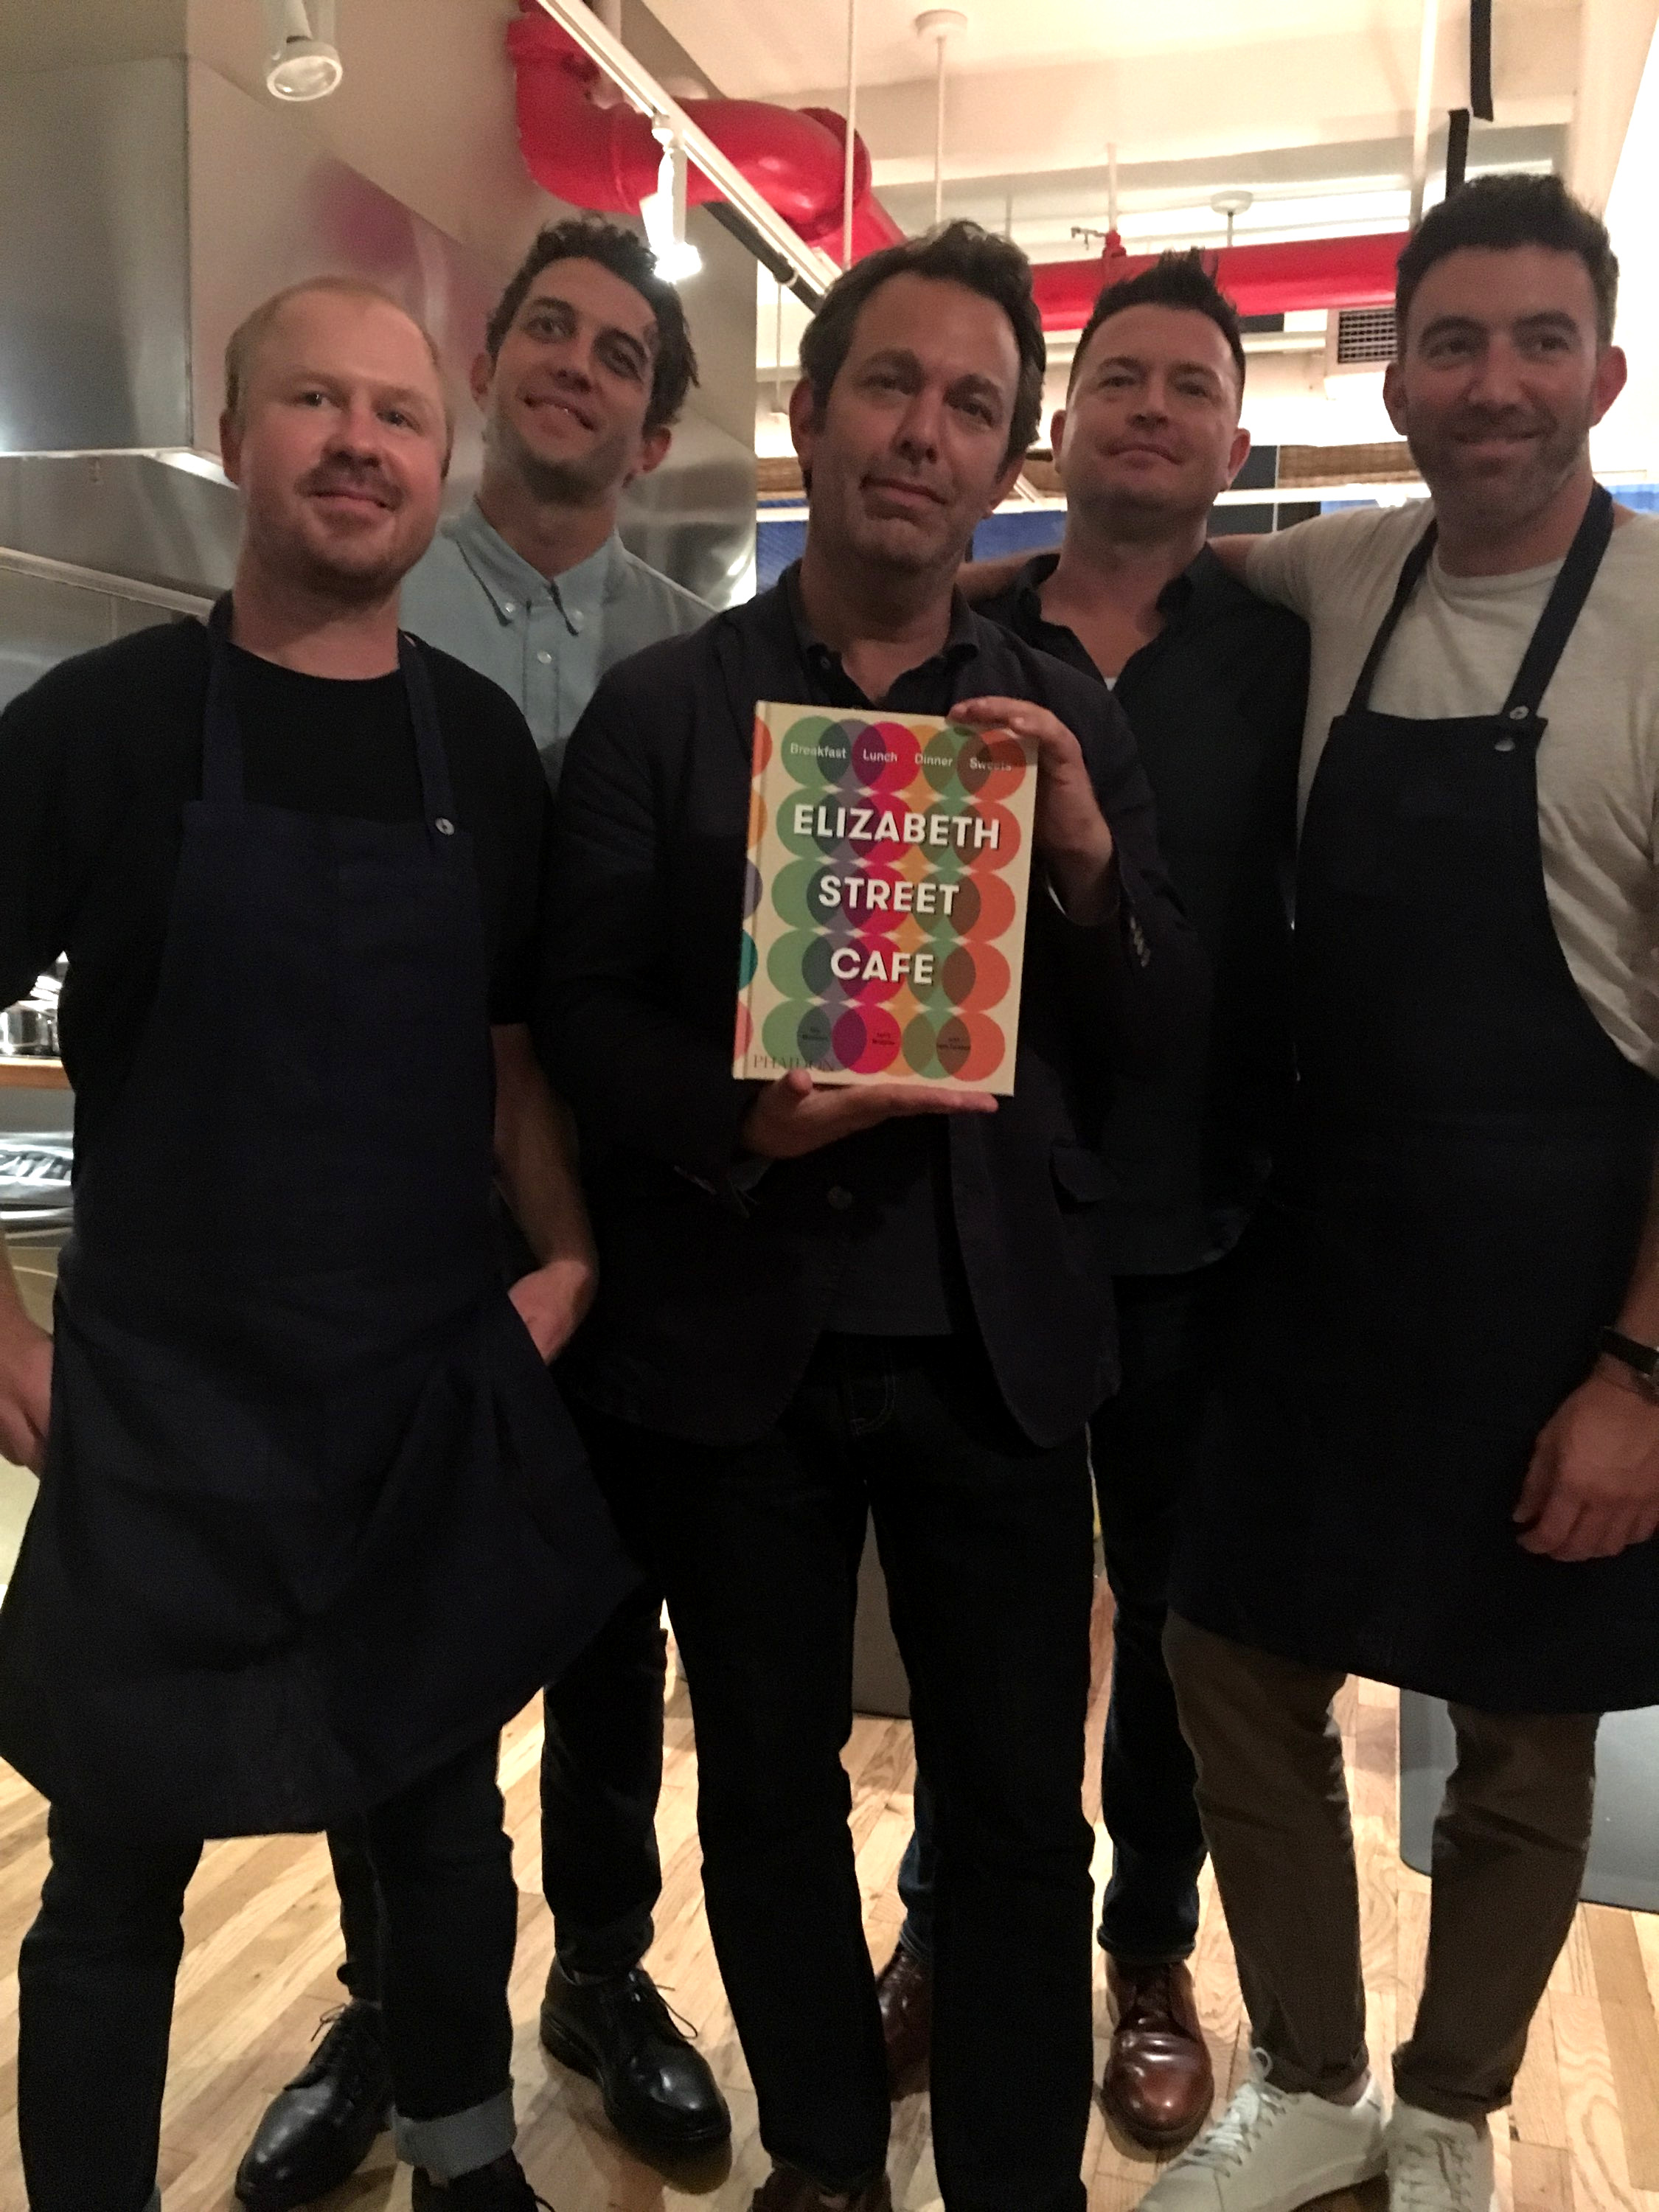 Elizabeth Street Cafe authors Tom Moorman (far left) and Larry McGuire (far right) with Saveur's Adam Sachs (centre)